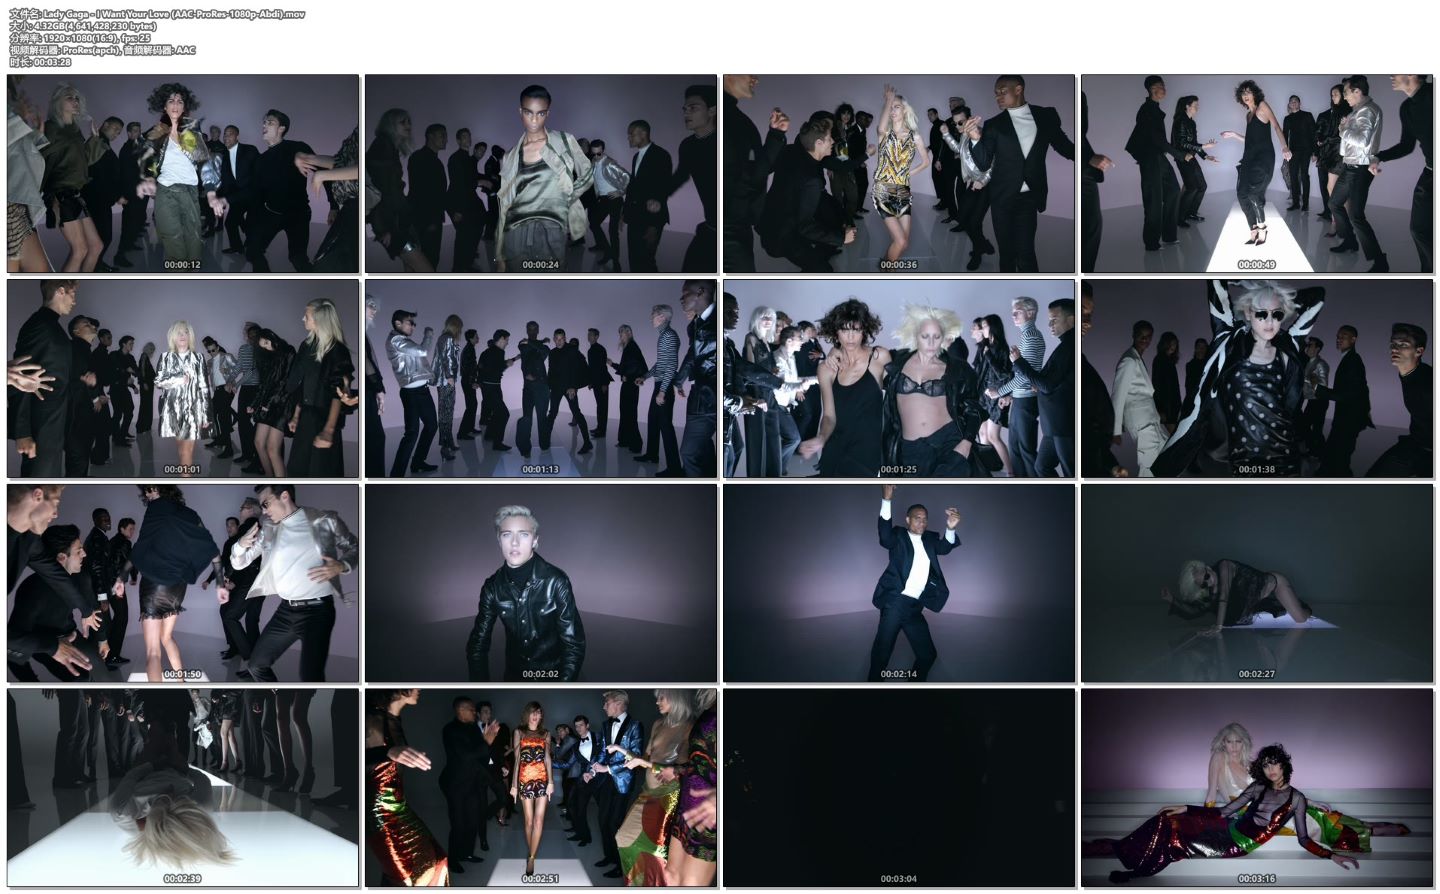 Lady Gaga - I Want Your Love (AAC-ProRes-1080p-Abdi).